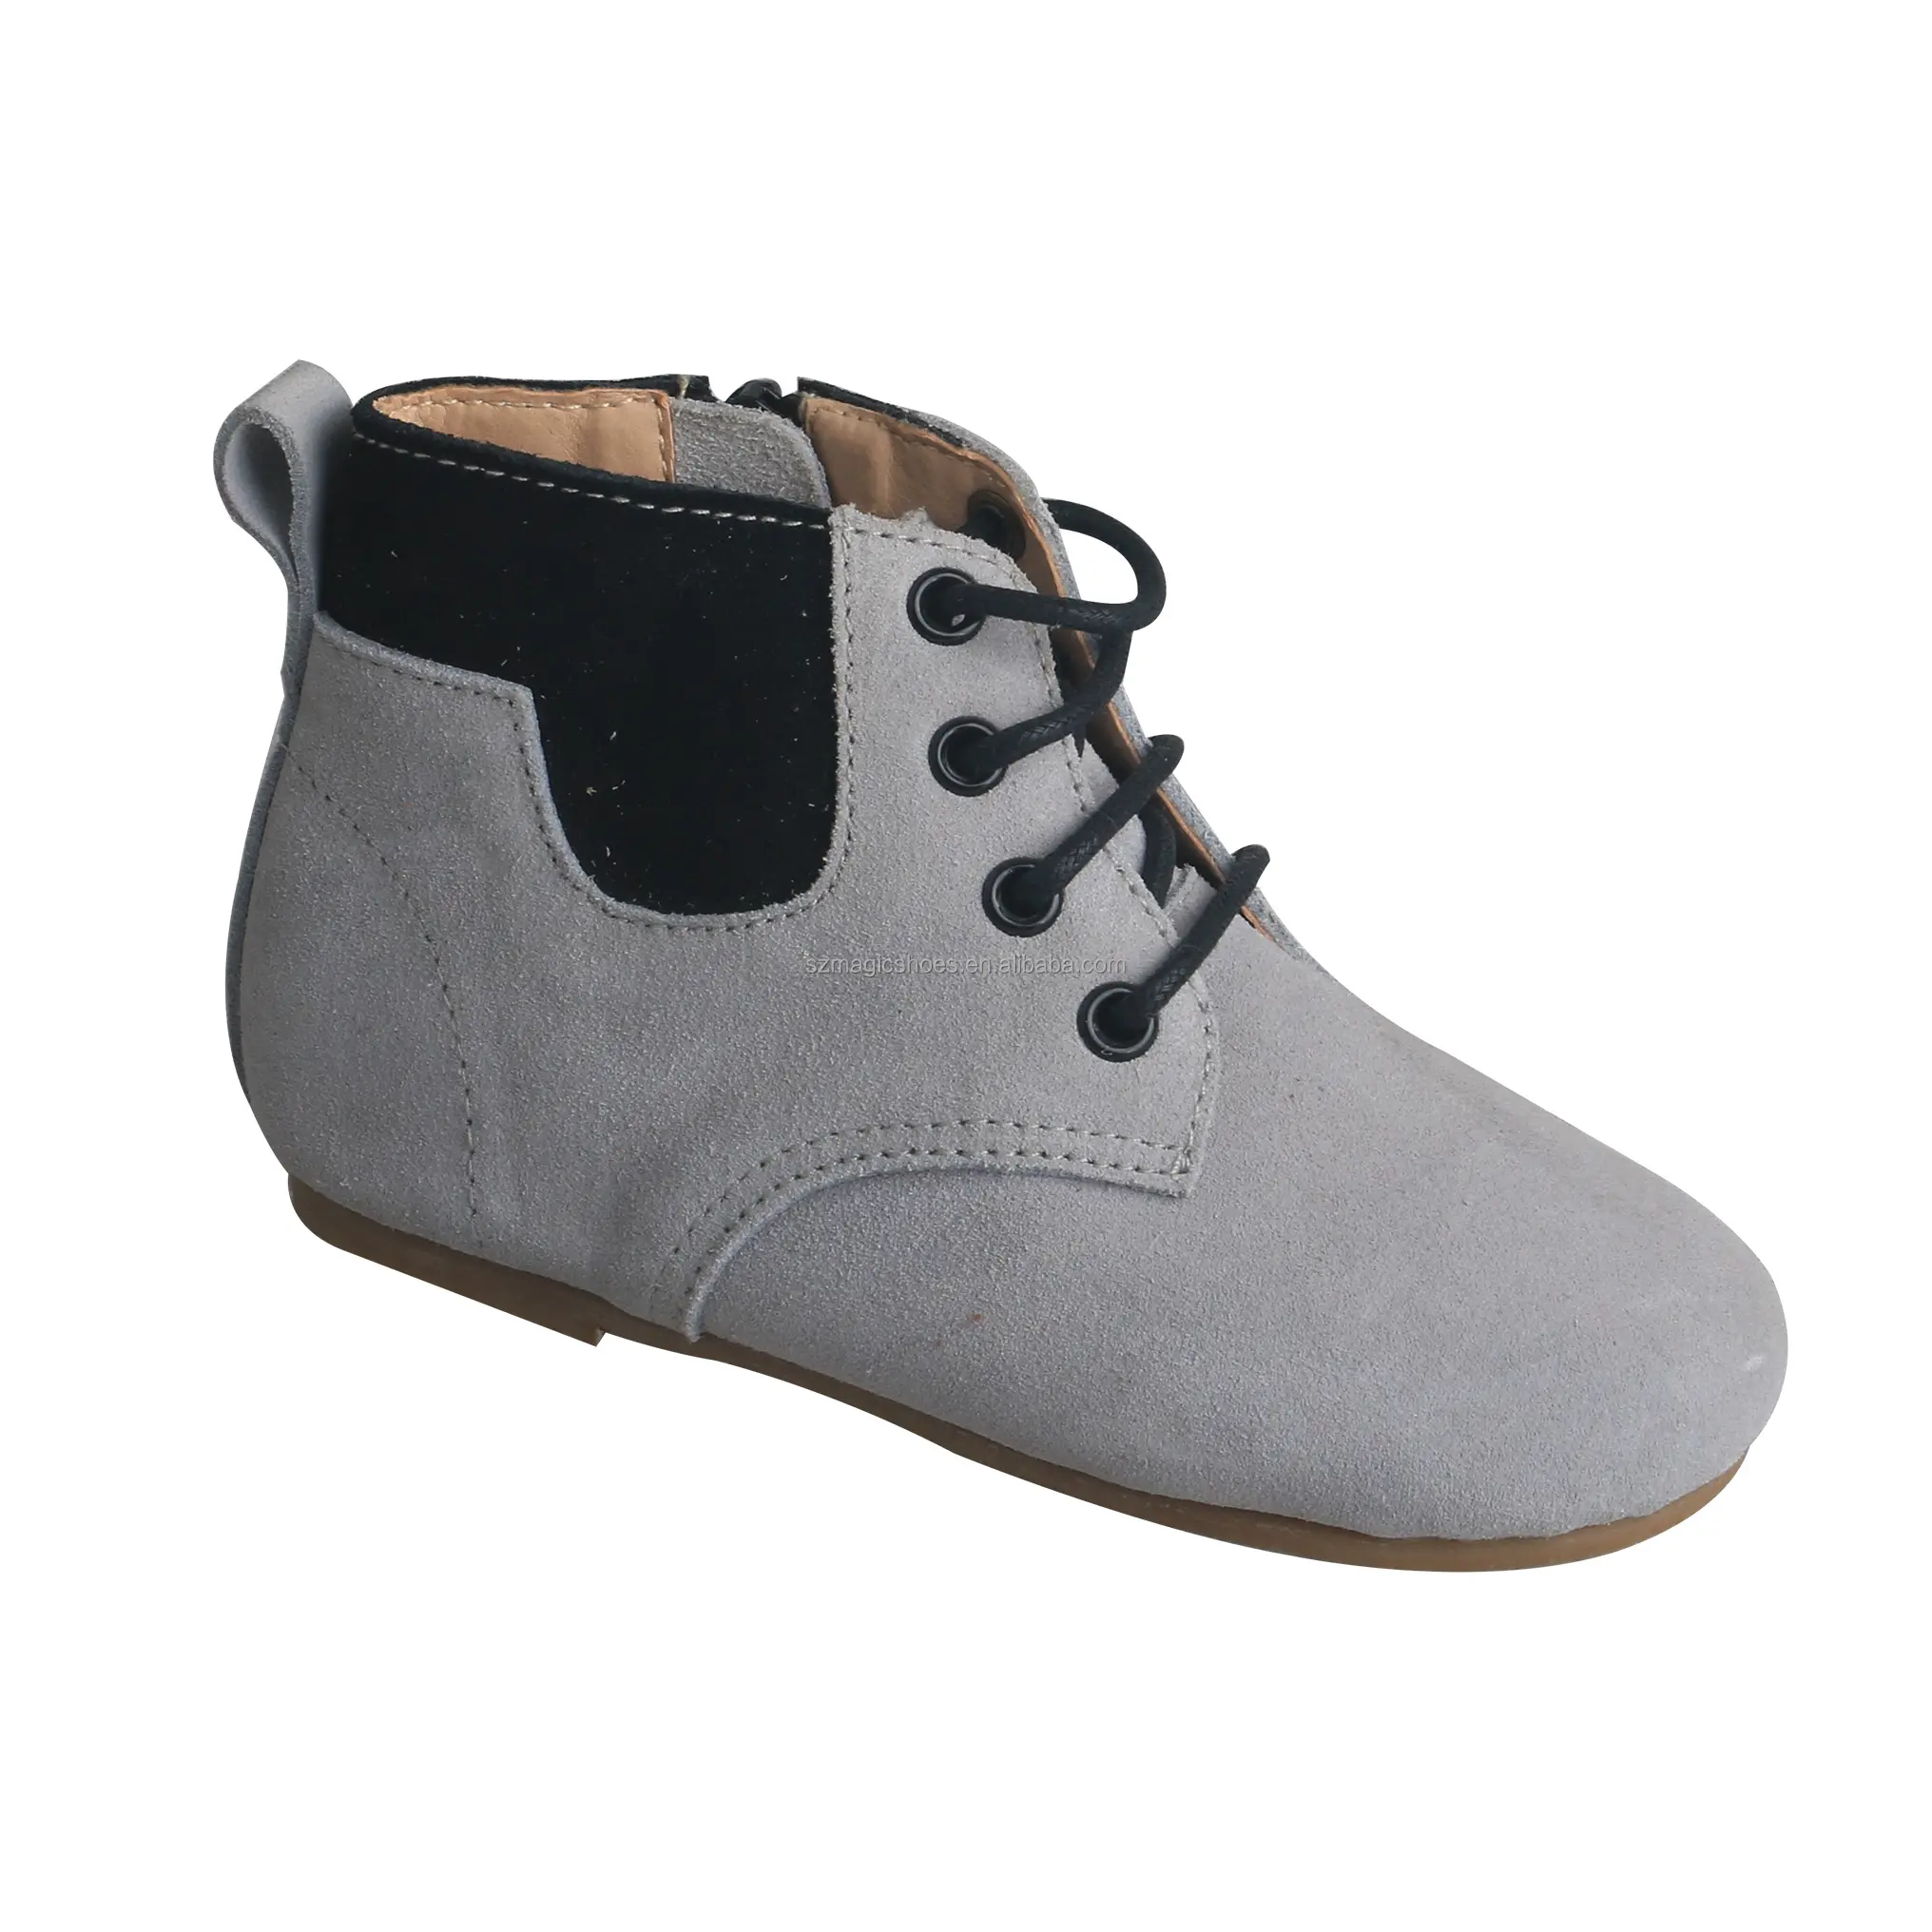 Wholesale Mix Sizes Customized Suede leather Shoes Lovely Fancy Handmade Flexible Durable Leather Kids Boots